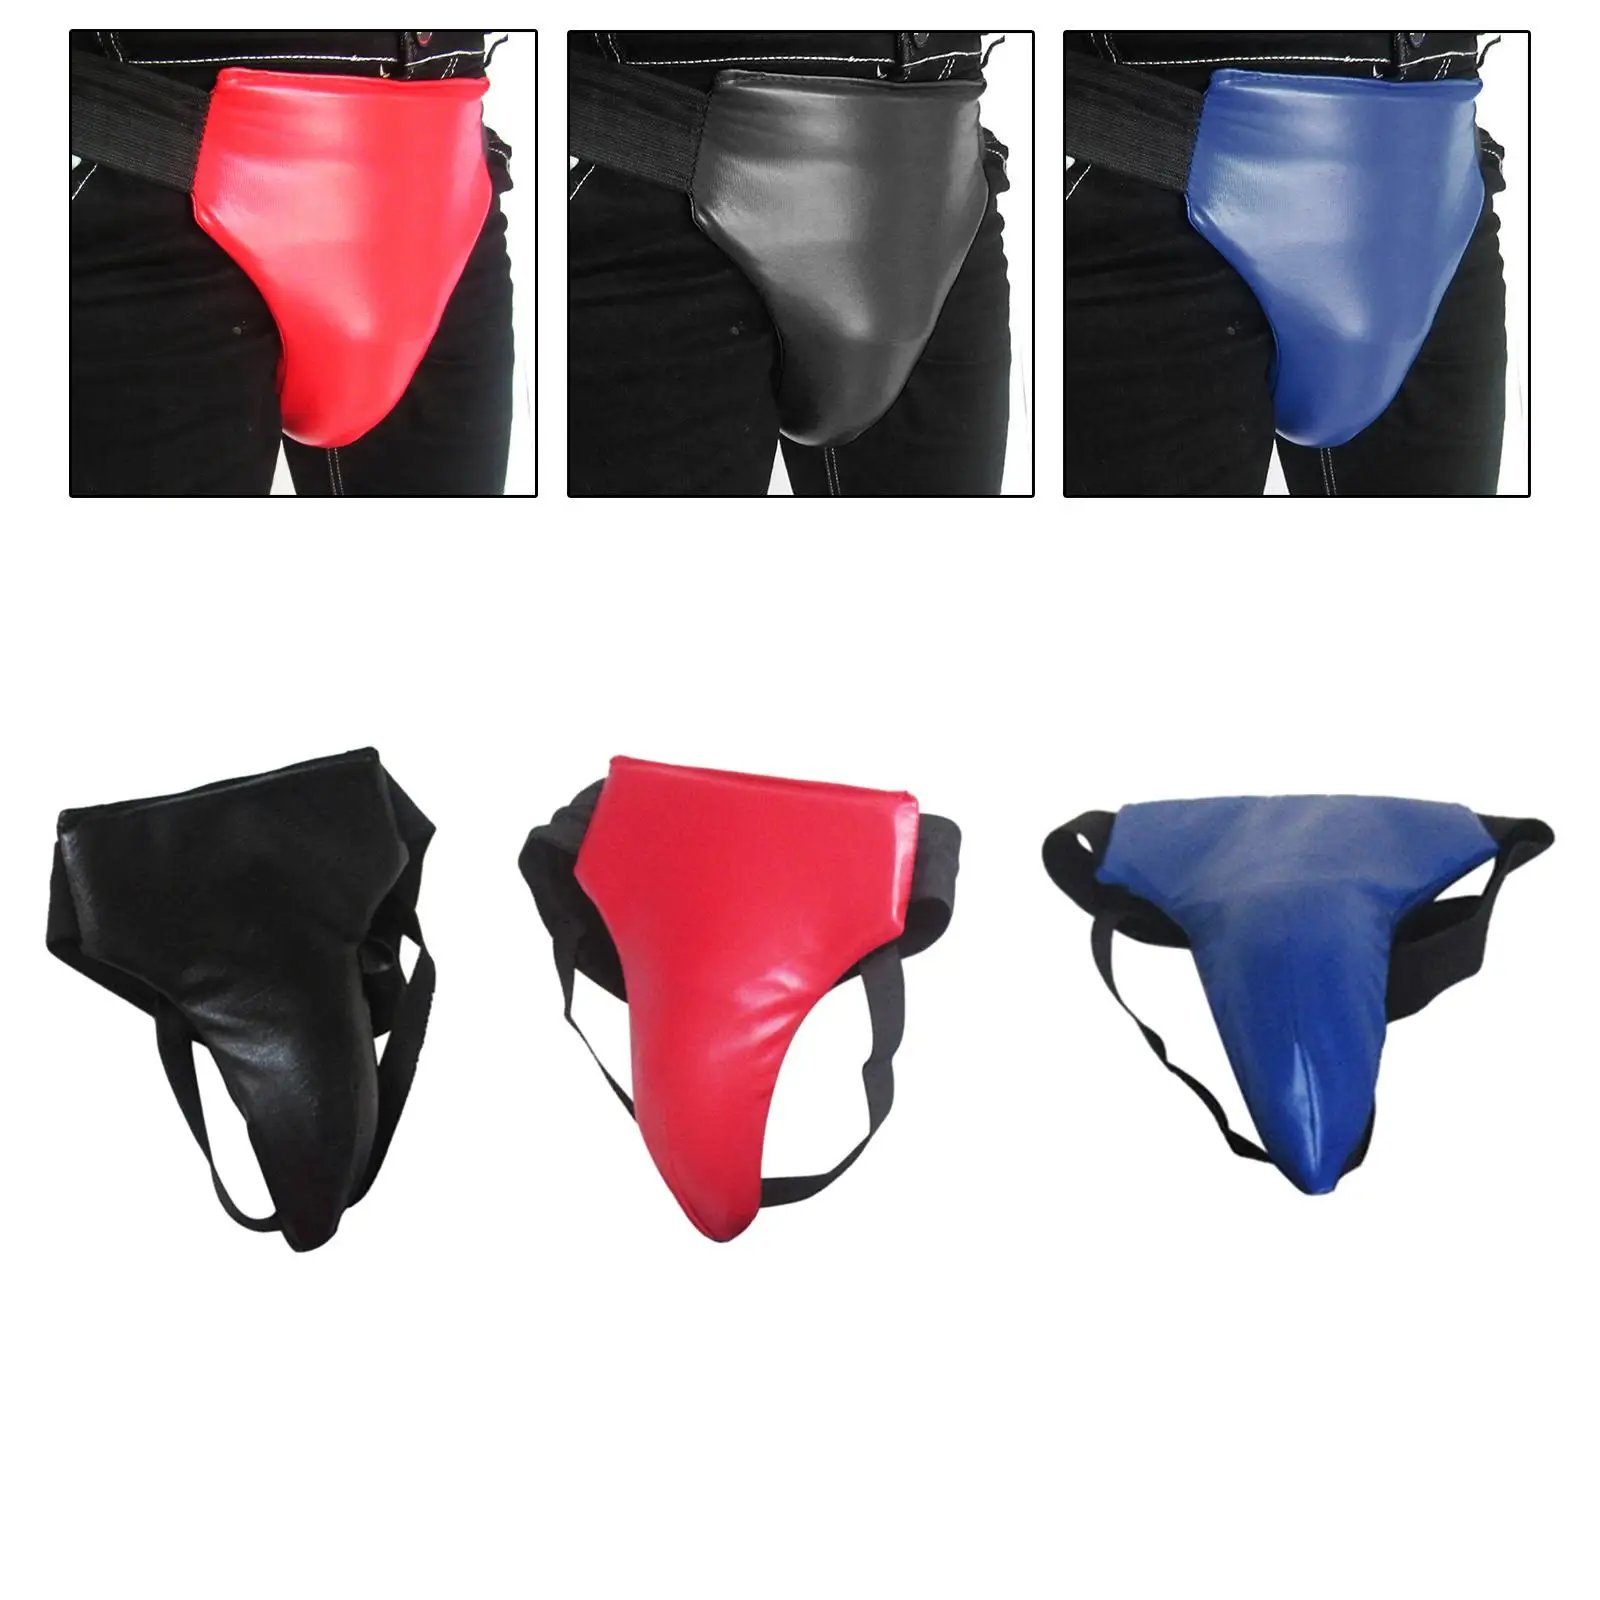 Taekwondo Groin Protector Safety Cup Pocket Training Equipment Groin Protector Cup for Sanda Sports Grappling Kickboxing Karate